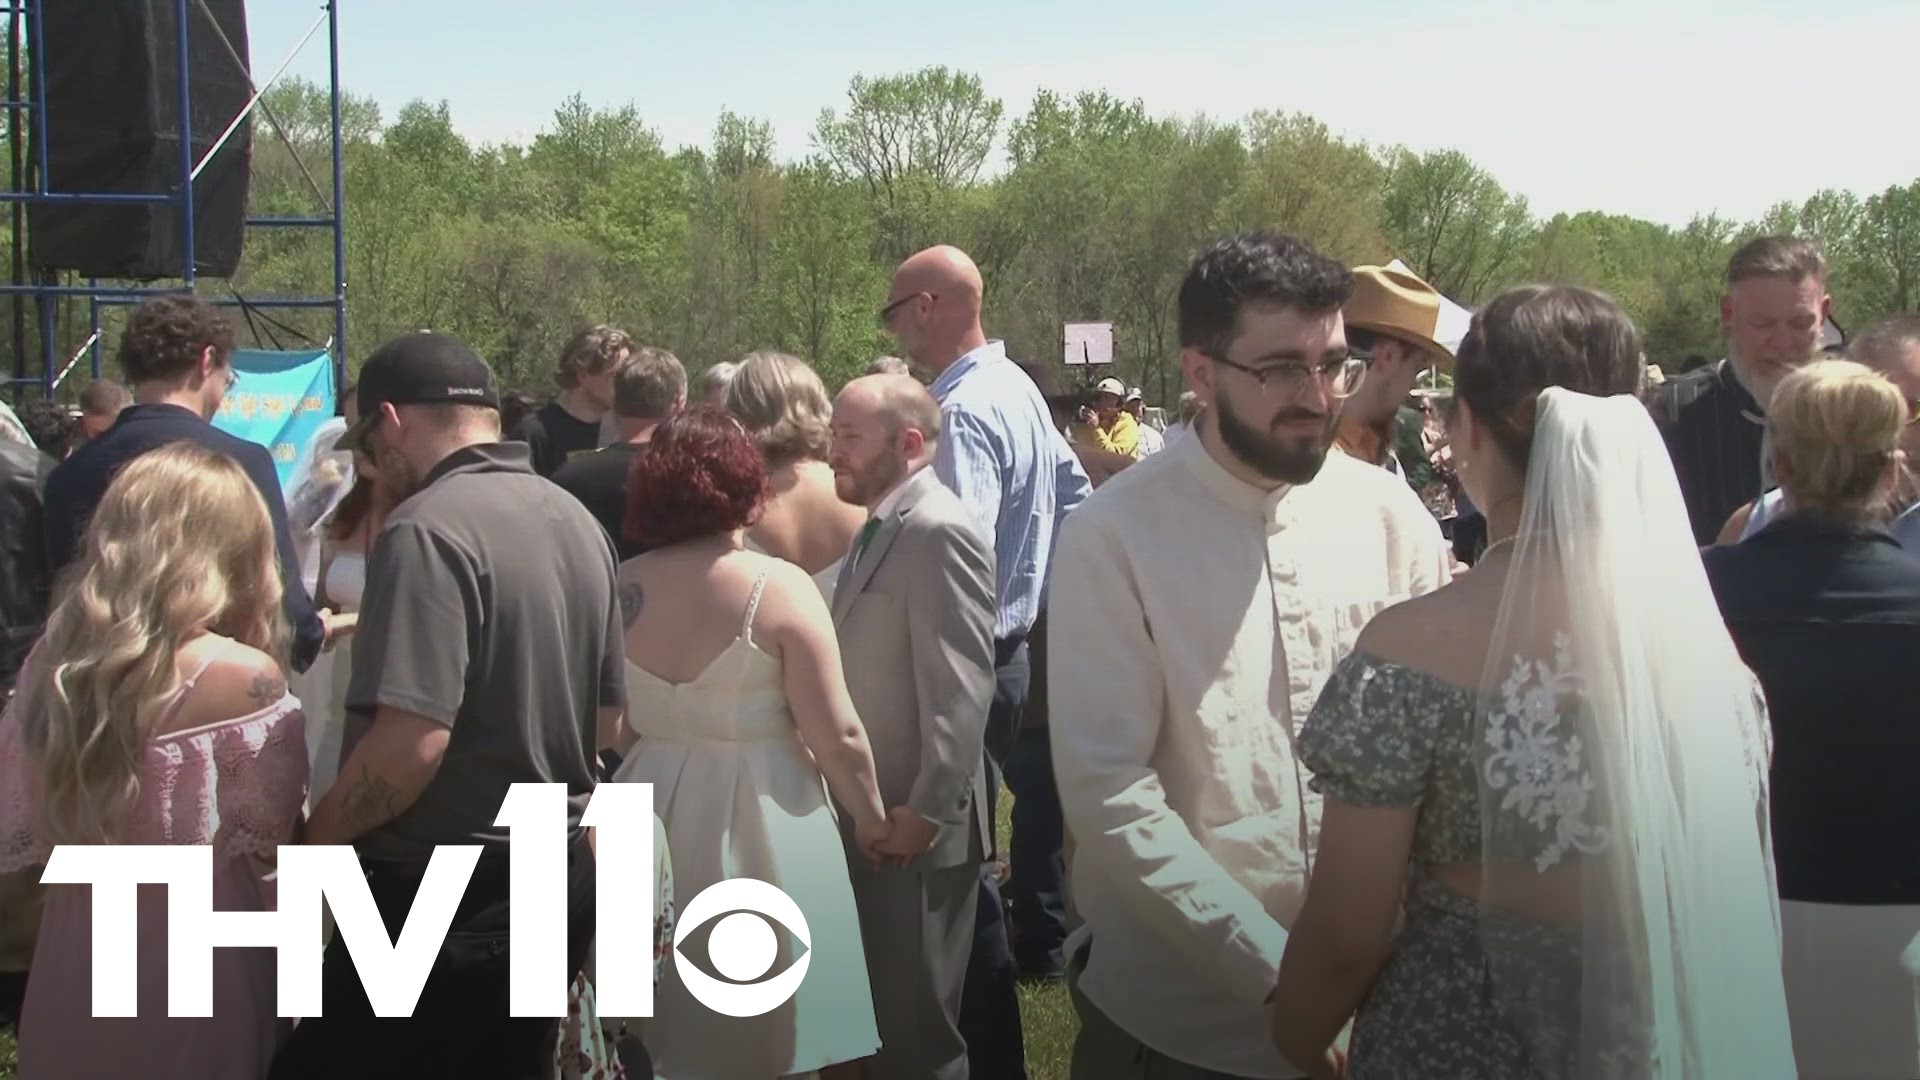 Over 100 couples got married during the historic total solar eclipse on Monday — all in part of a ceremony that they'll never forget in Arkansas.